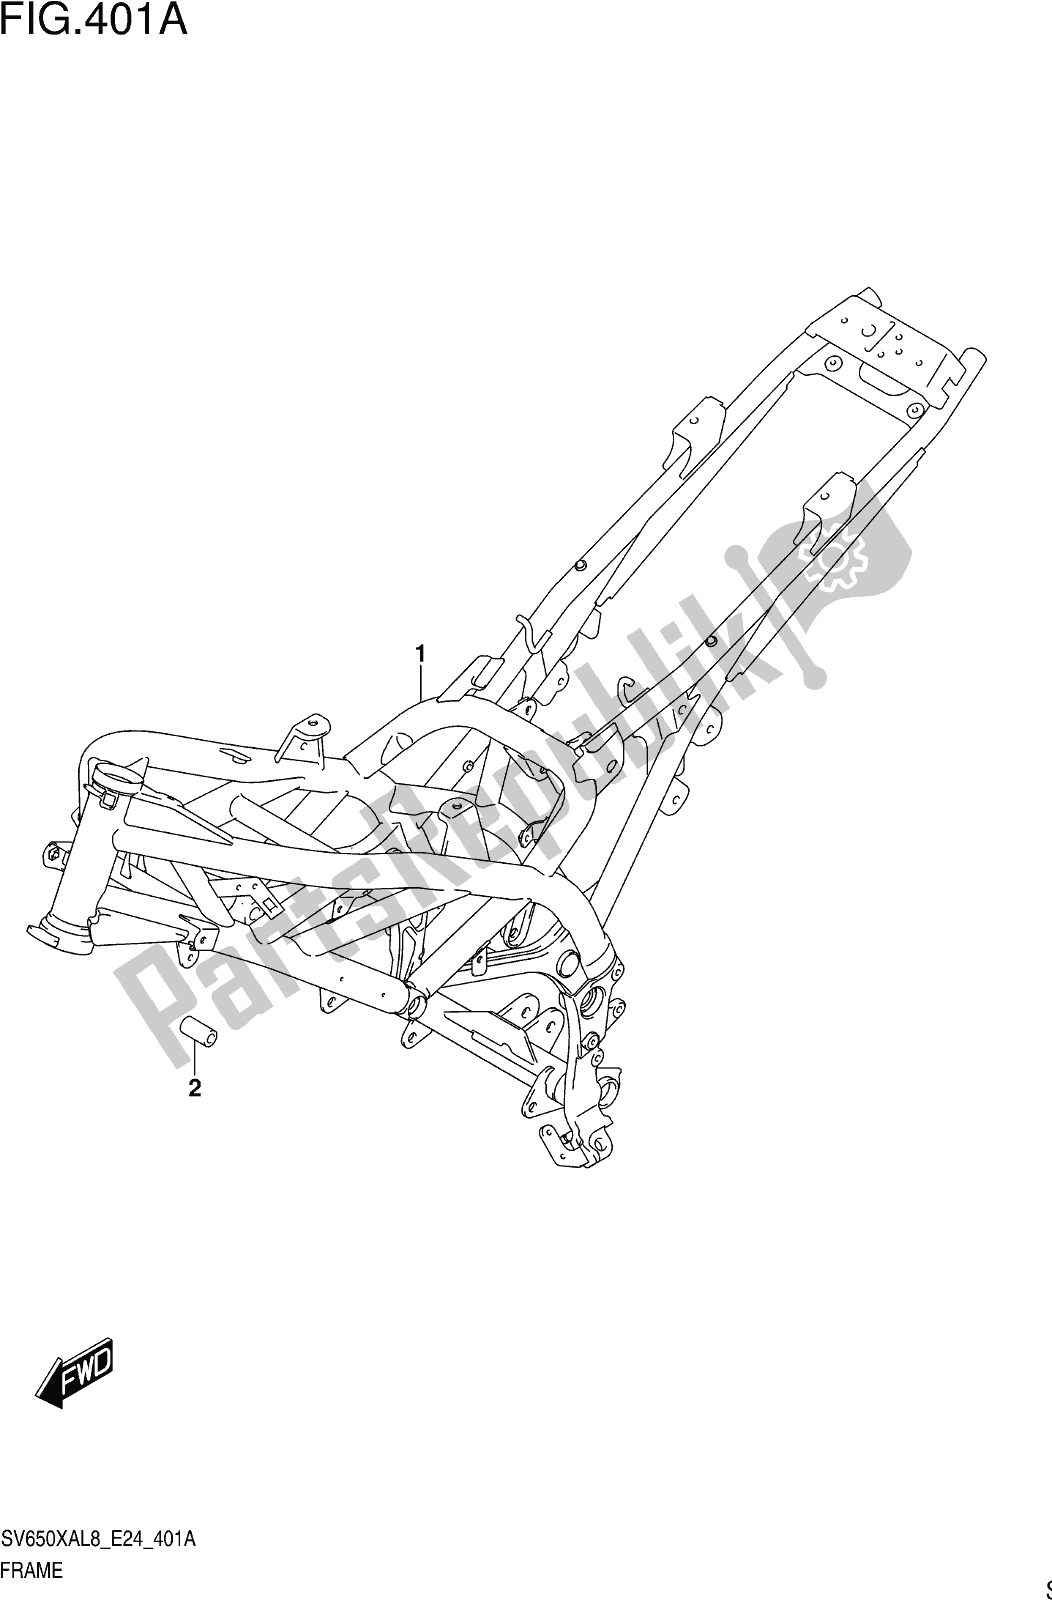 All parts for the Fig. 401a Frame of the Suzuki SV 650 XA 2018